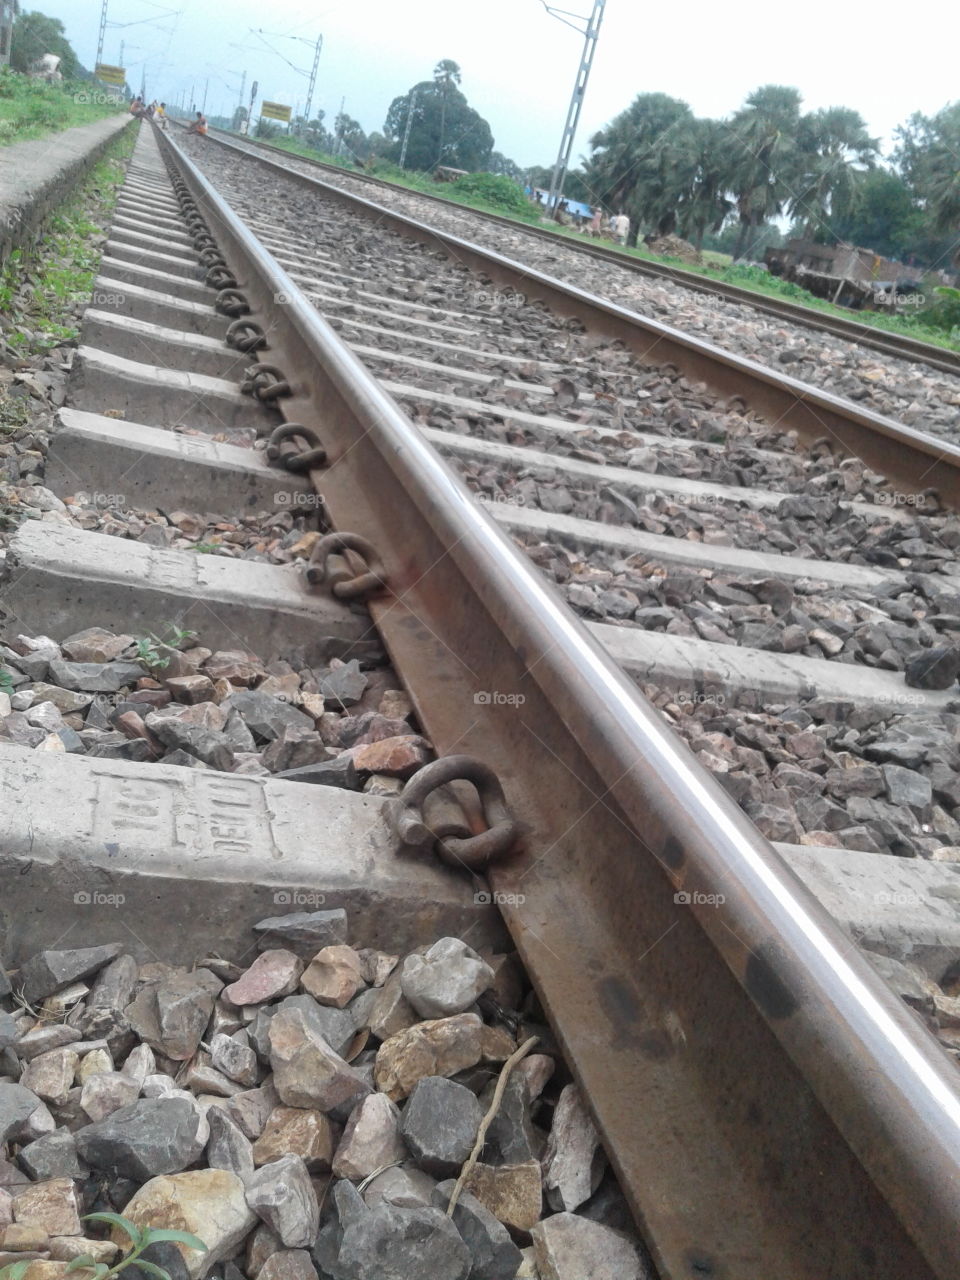 this is the railway....I tried to click a attractive pic and present you this hope you all like it and rate my photography for sell....PHOTOGRAPHY is my life.